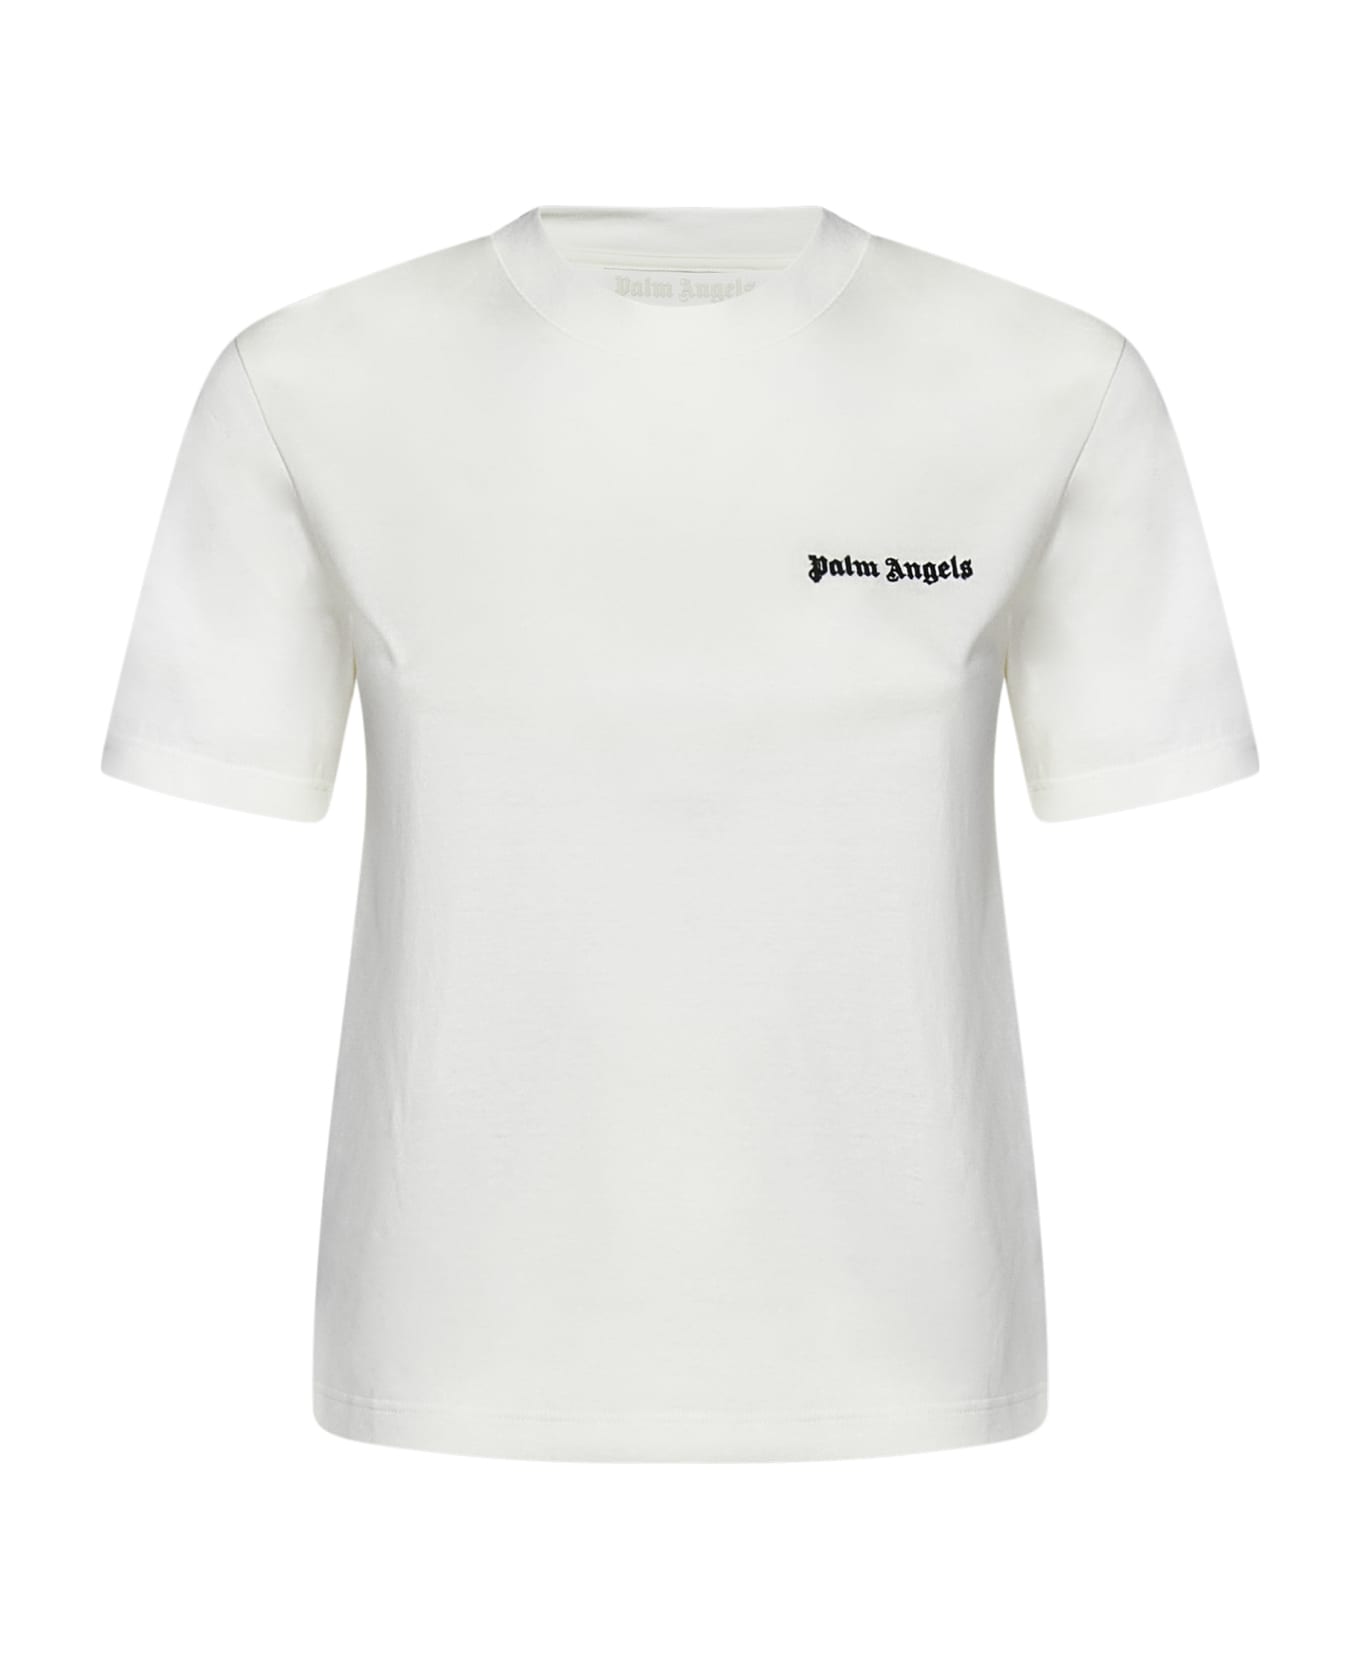 Palm Angels Classic Logo Fitted T-shirt - White